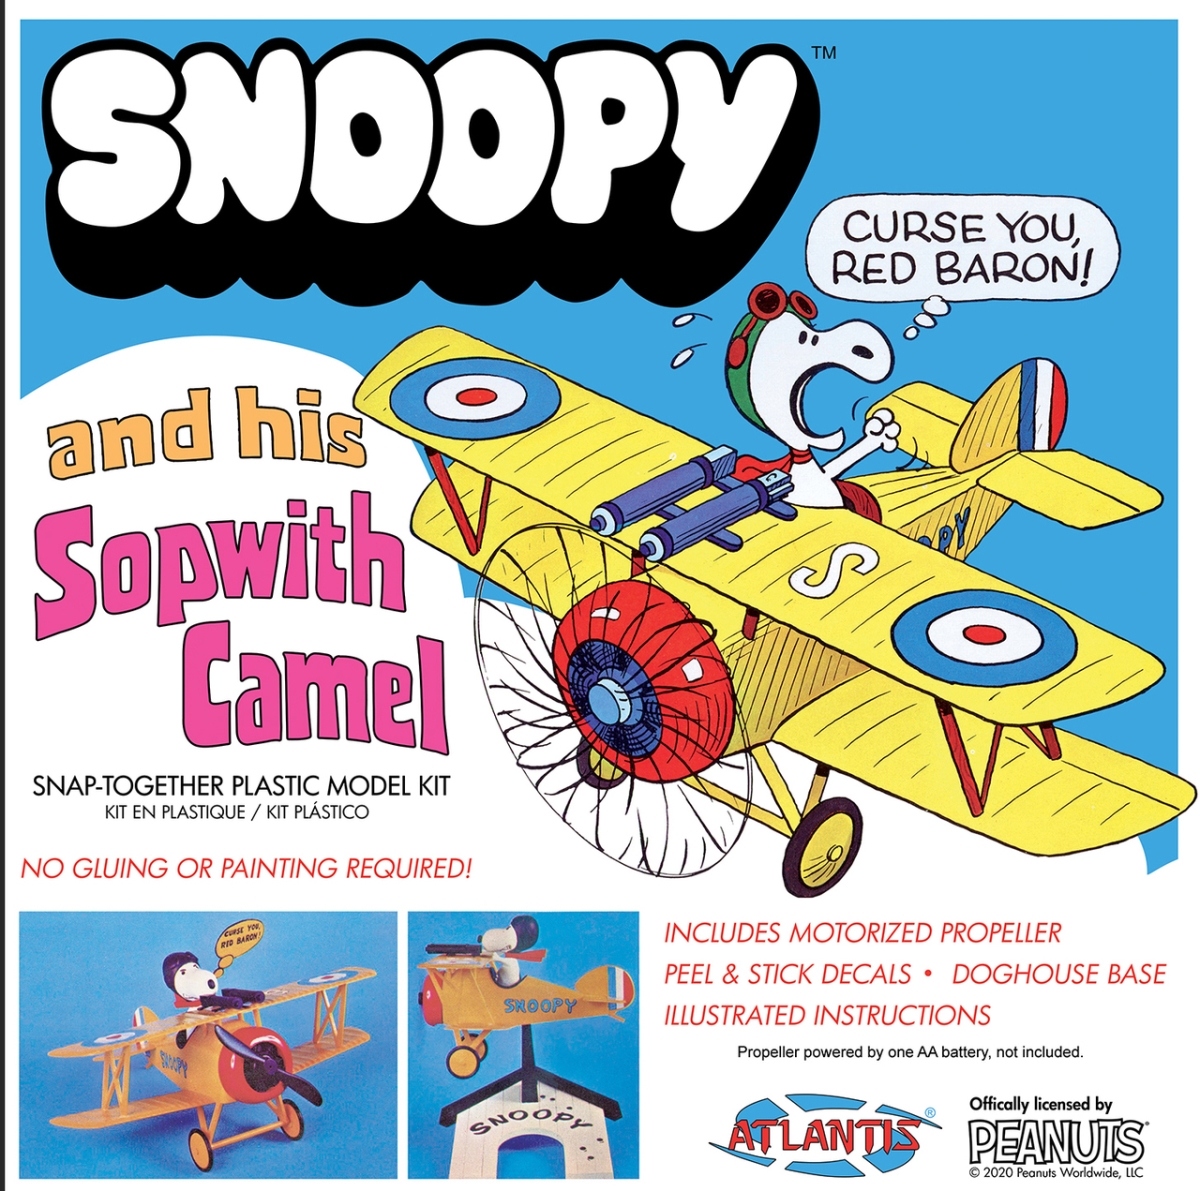 Picture of Atlantis Models AANM6779 Snoopy & His Sopwith Camel Snap Plastic Figures